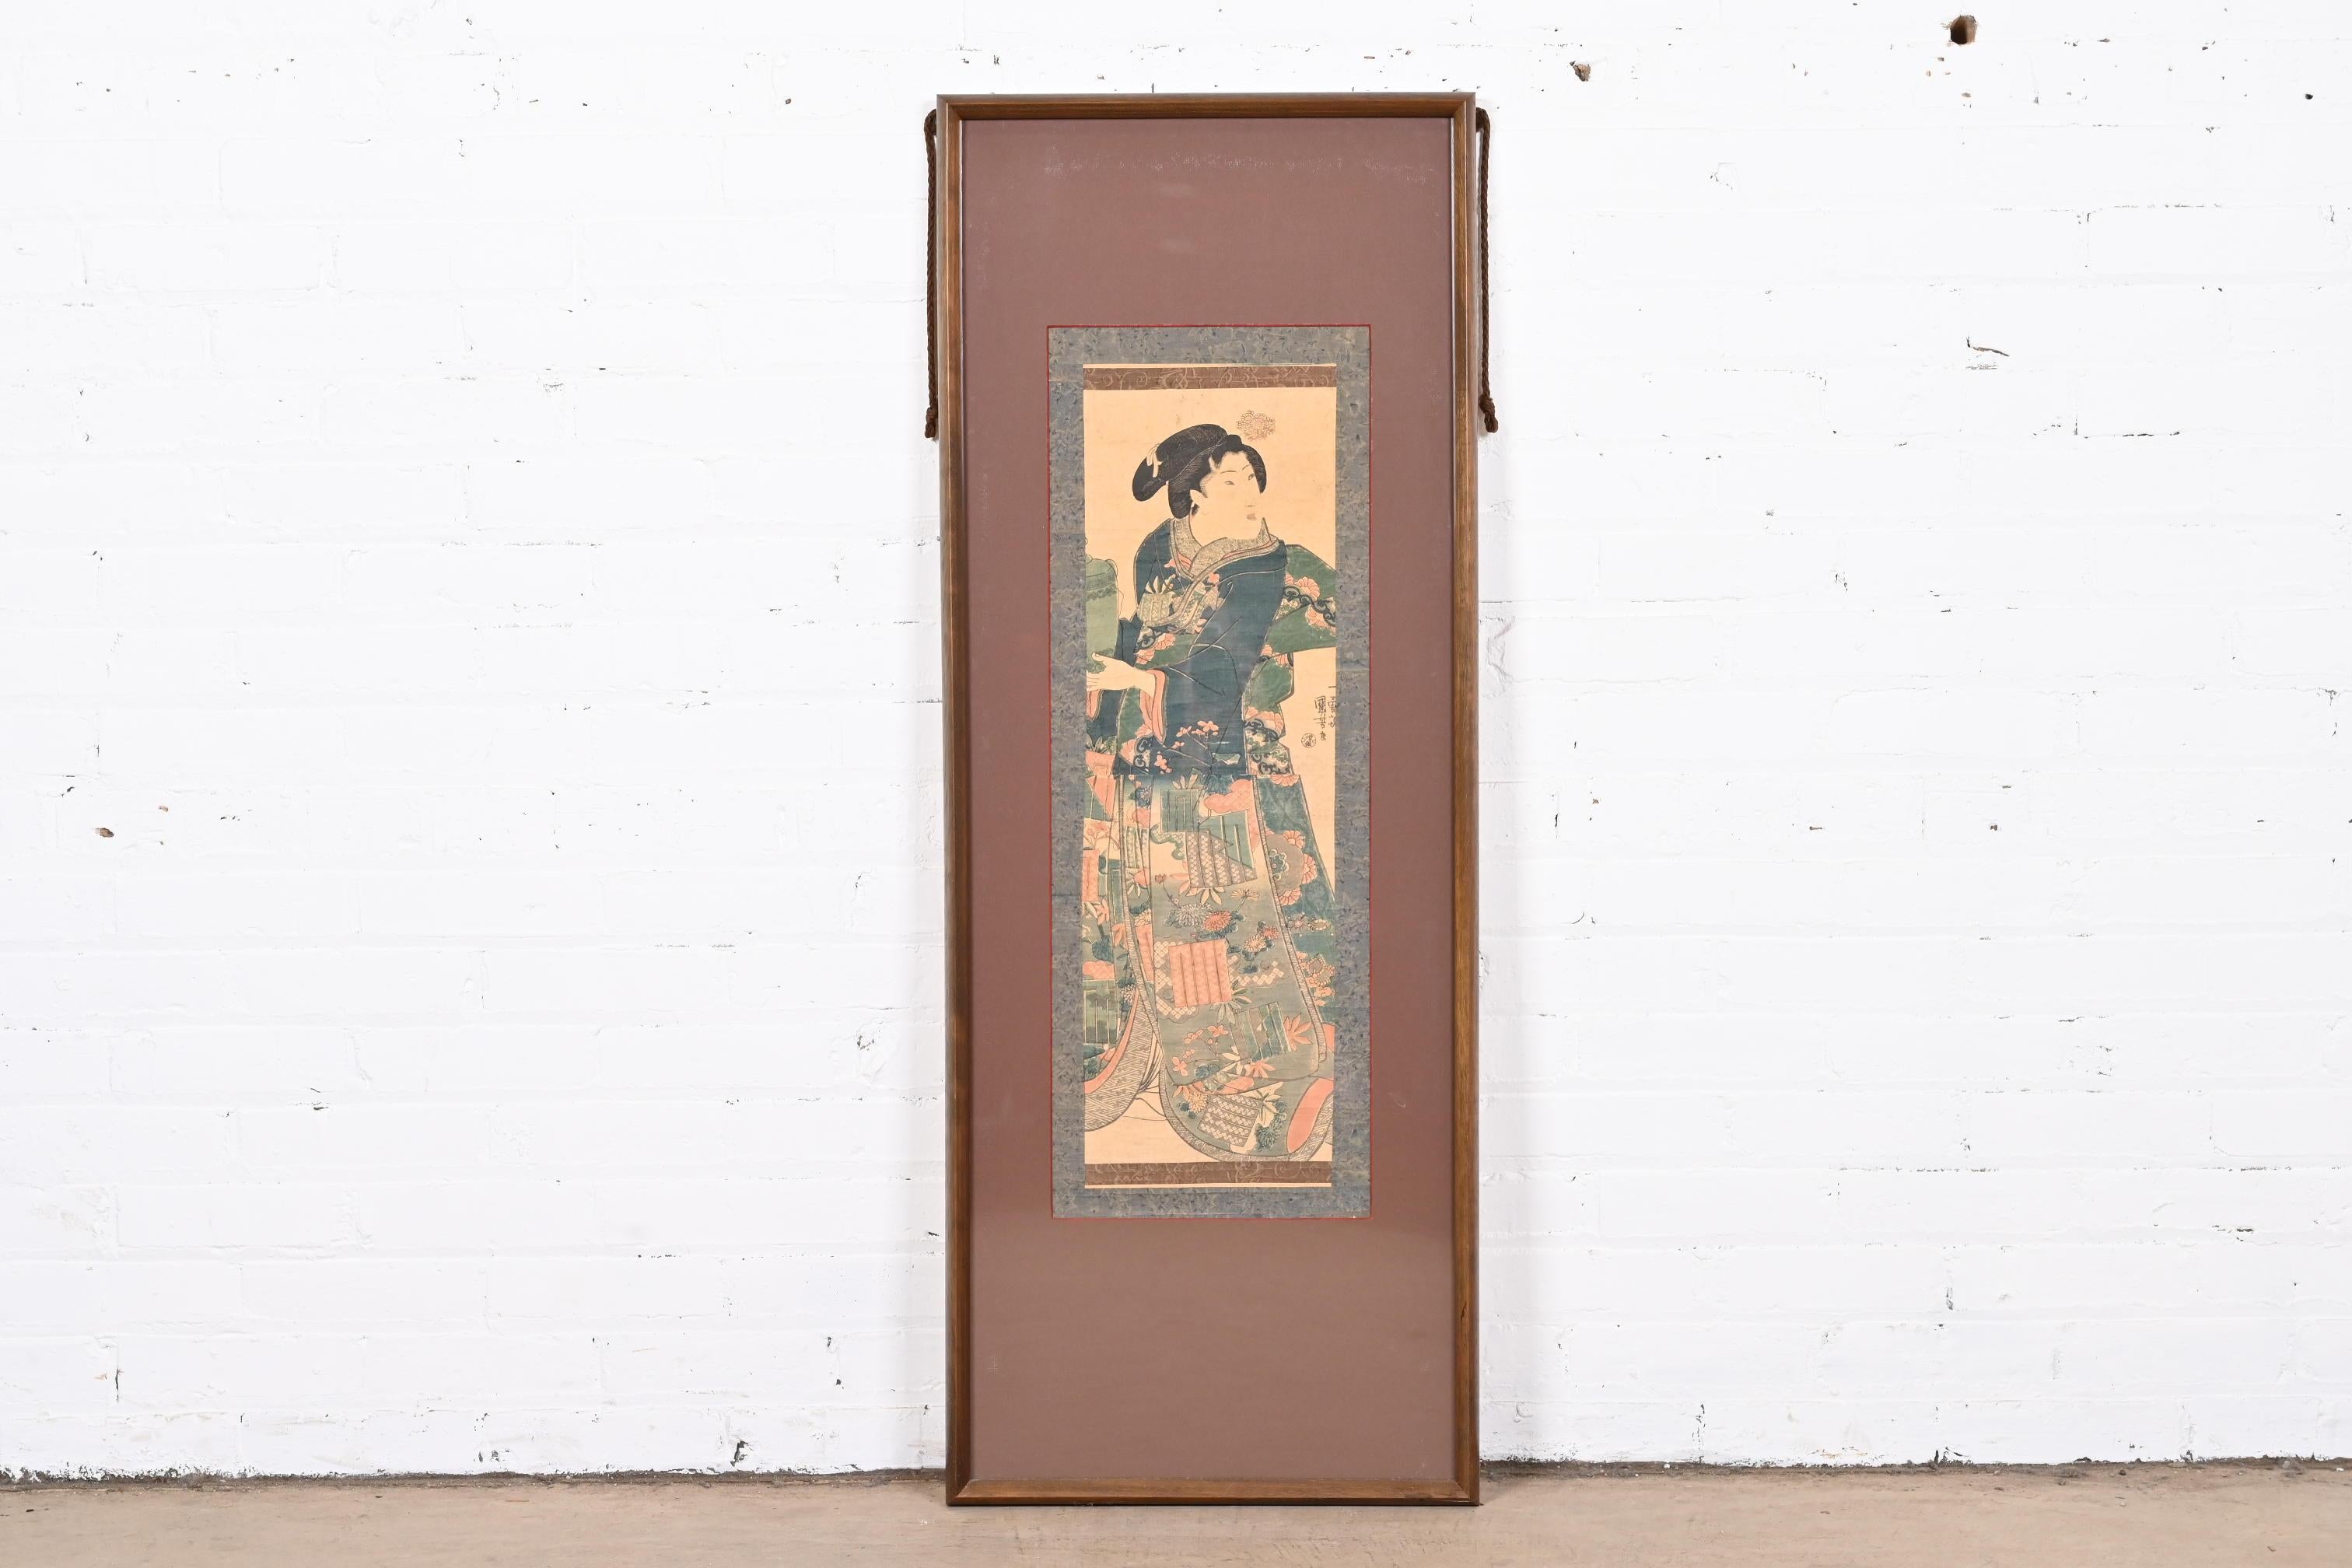 A beautiful vintage framed and matted Japanese scroll painting of a woman carrying a vase

Recently procured from Frank Lloyd Wright's DeRhodes House

Japan, Early 20th Century

Measures: 17.88